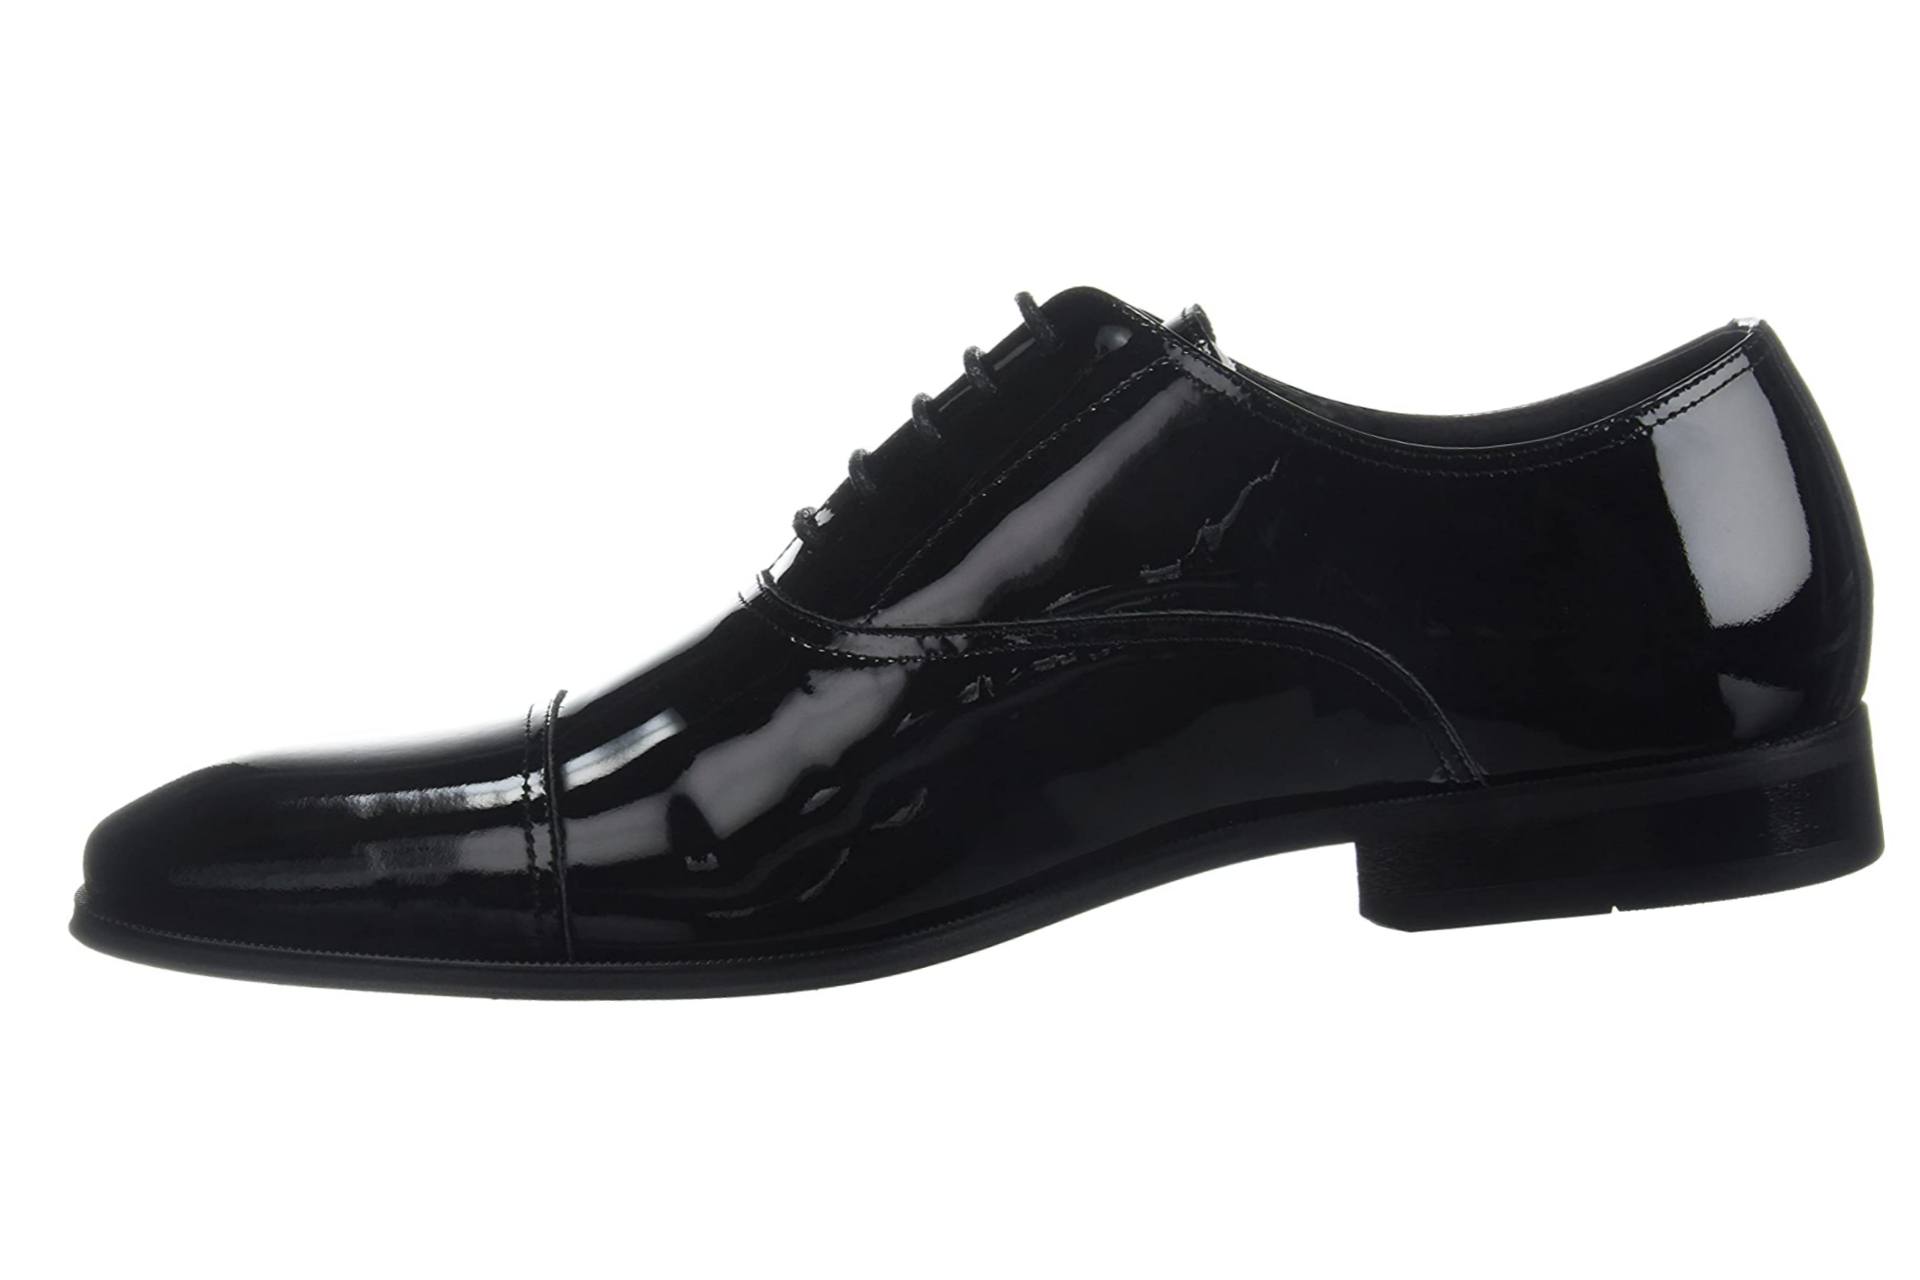 Oxford dress shoe for work